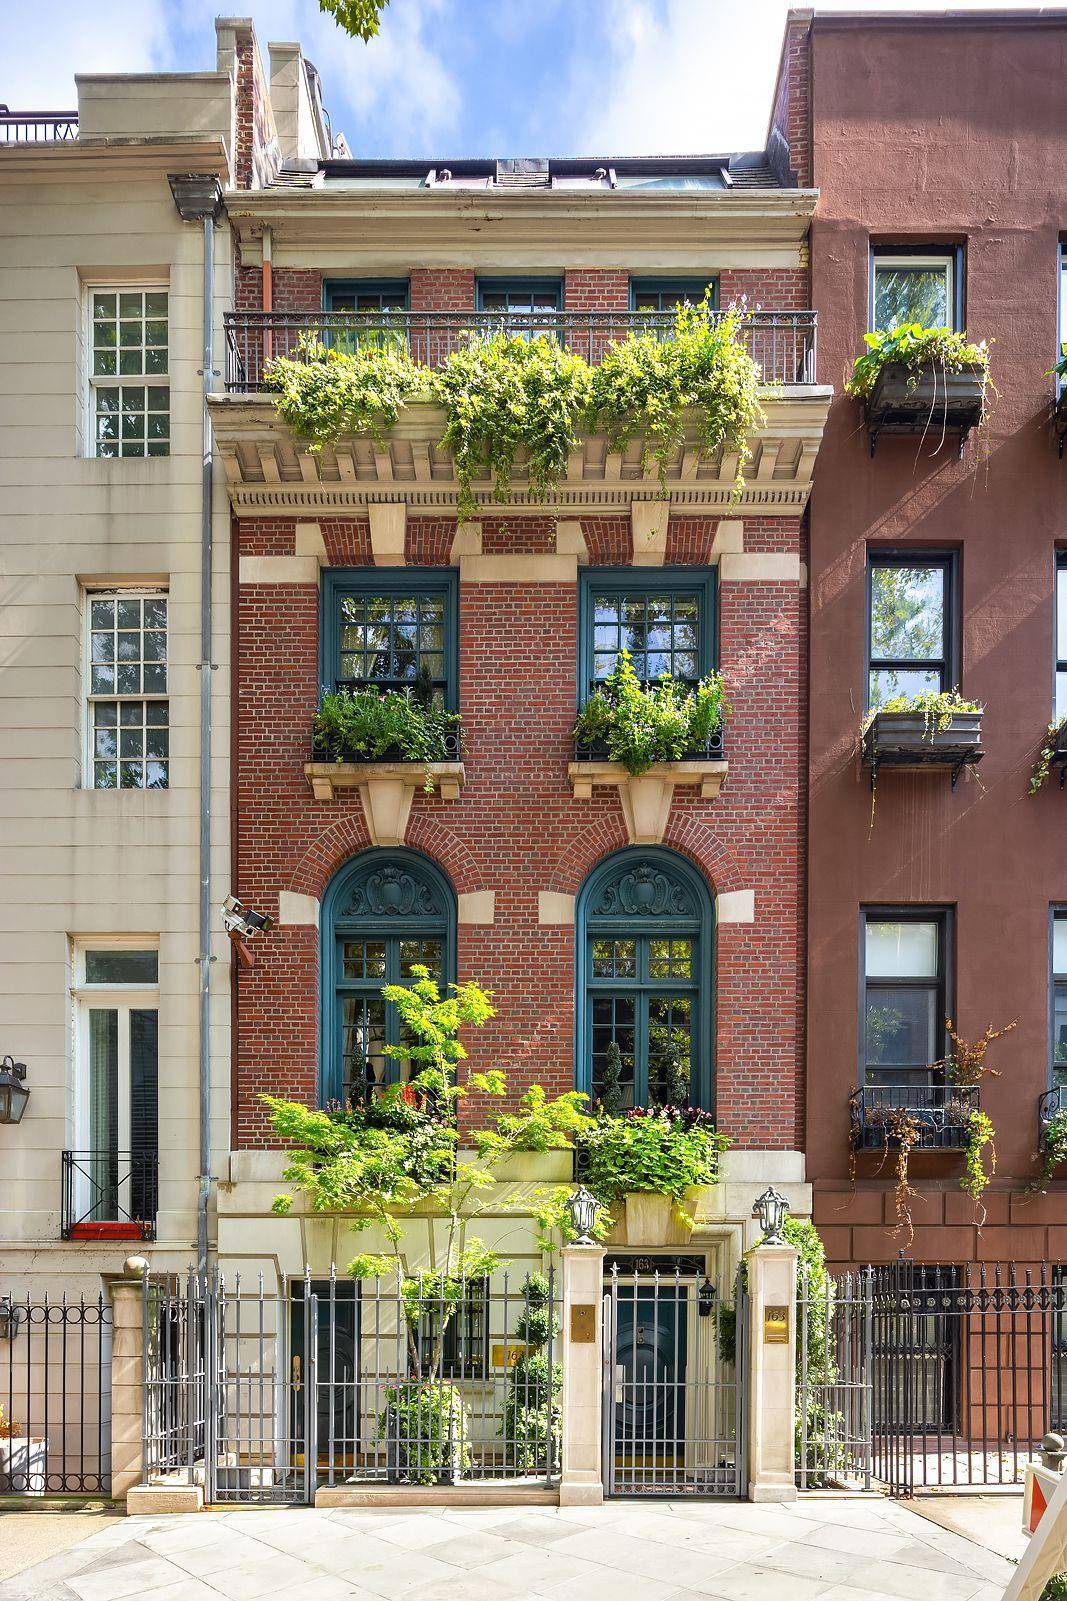 163 East 64th Street is located on one of the finest townhouse blocks in NYC.